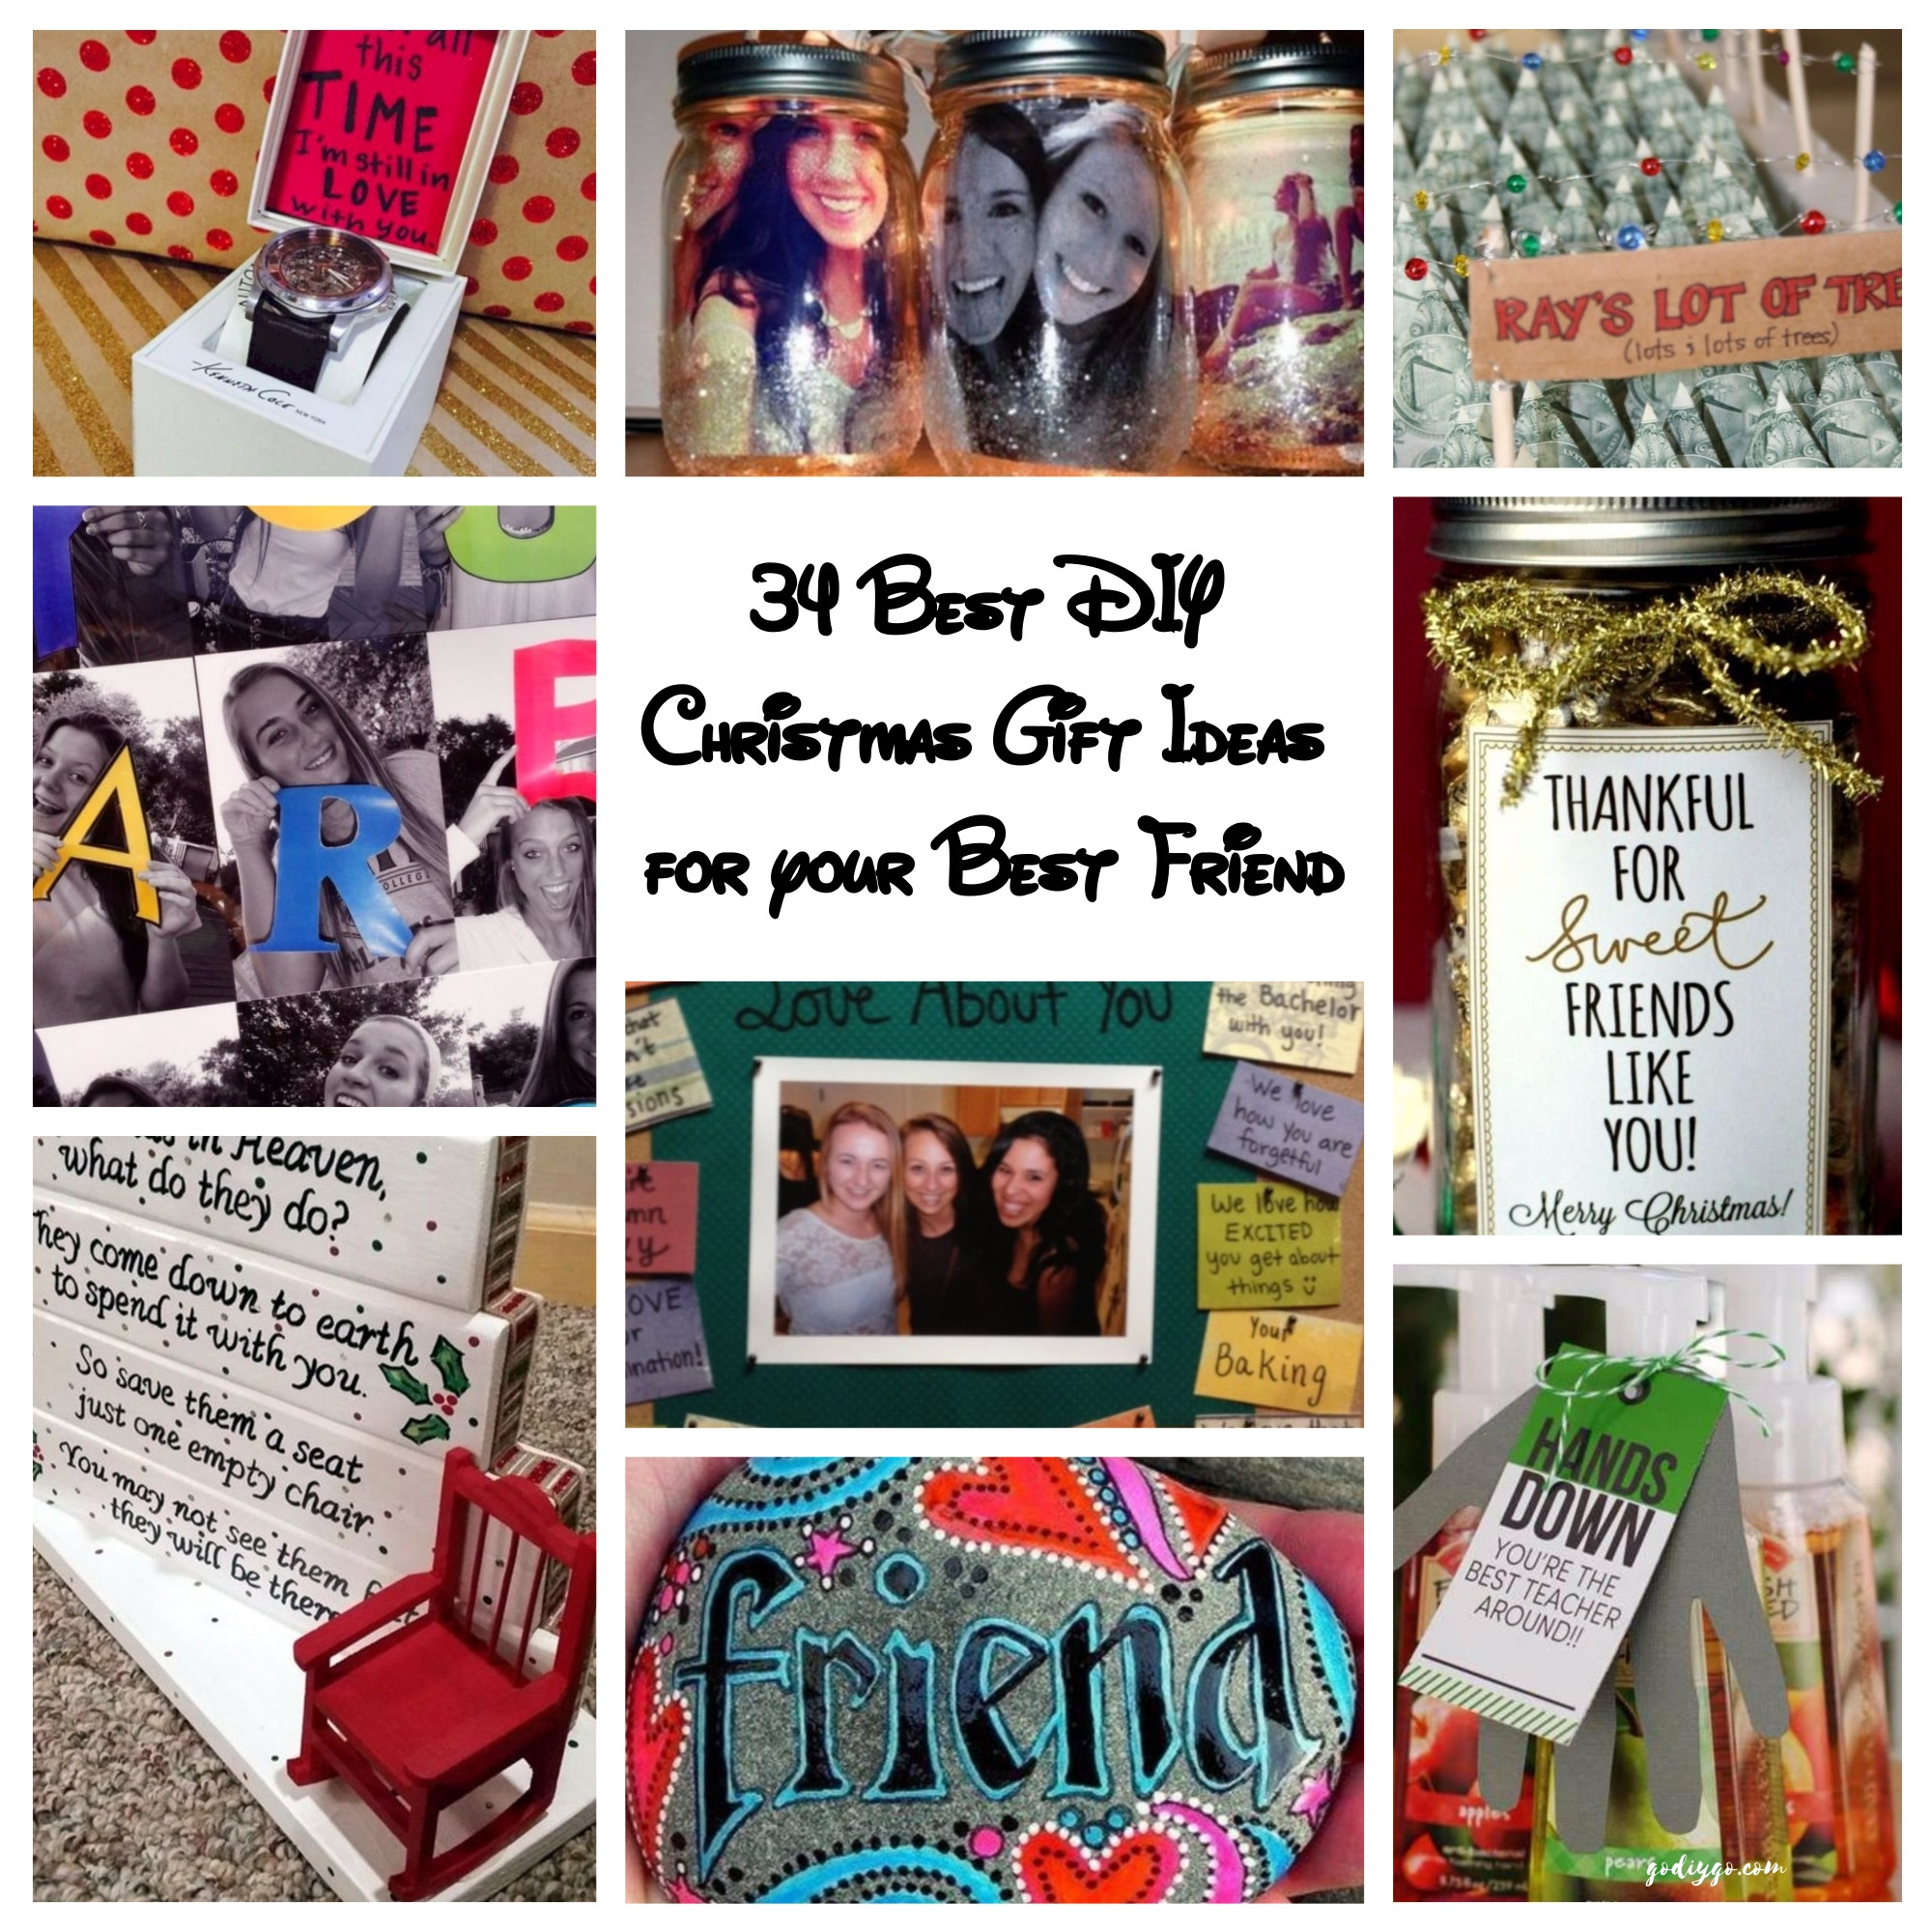 Friend Christmas Gift Ideas
 34 Best DIY Christmas Gift Ideas for your Best Friend